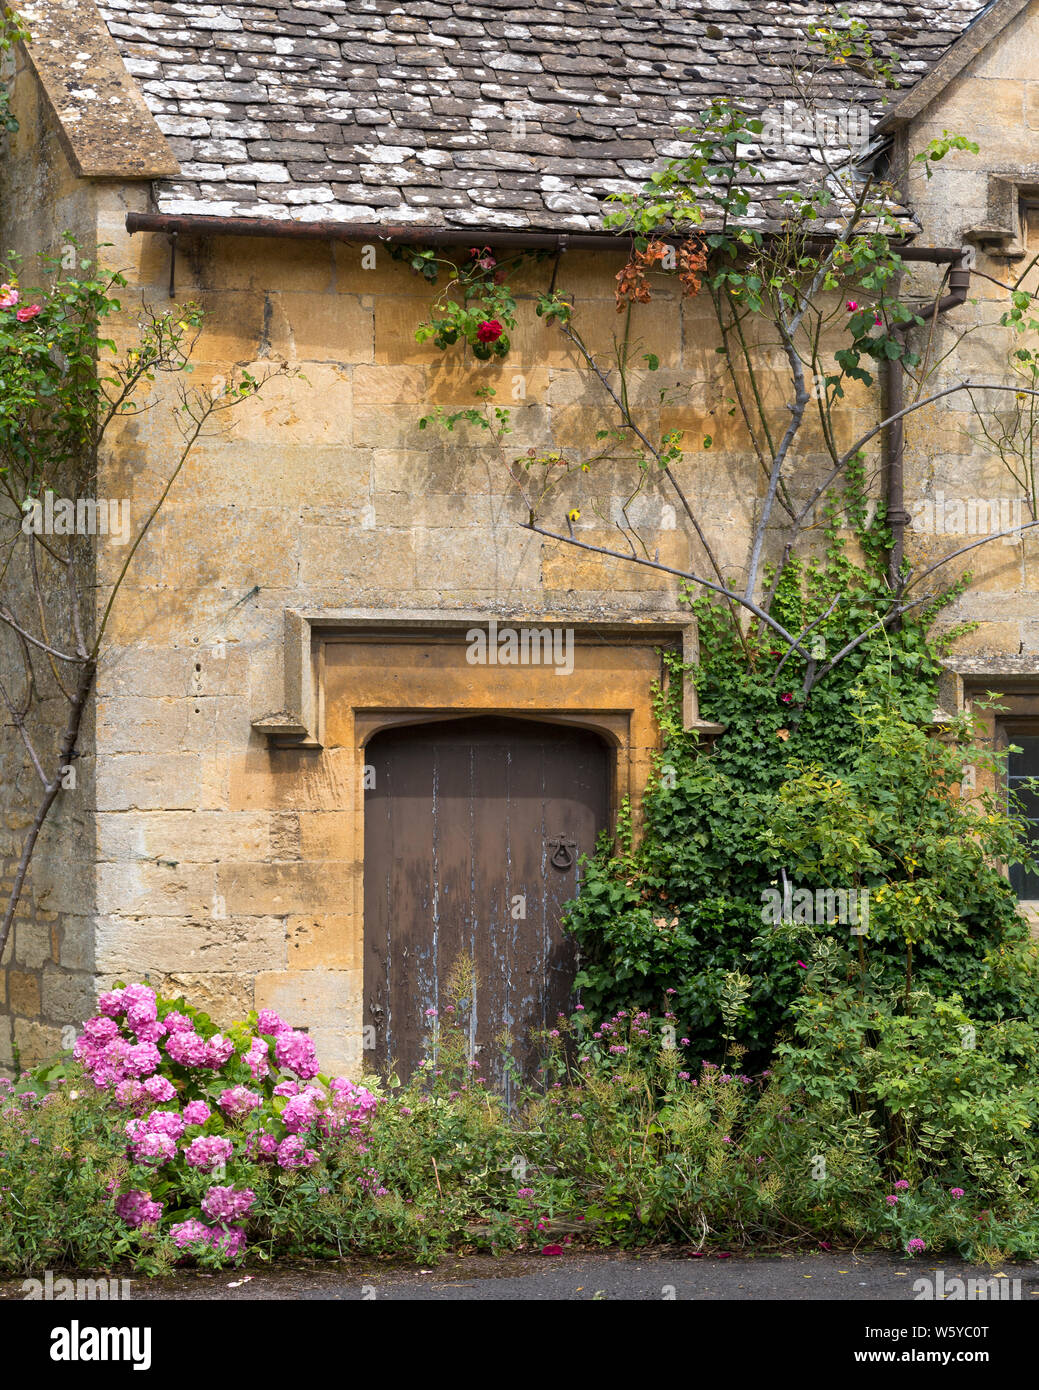 Old country home in the Cotswolds, Stanton, Gloucestershire, England Stock Photo